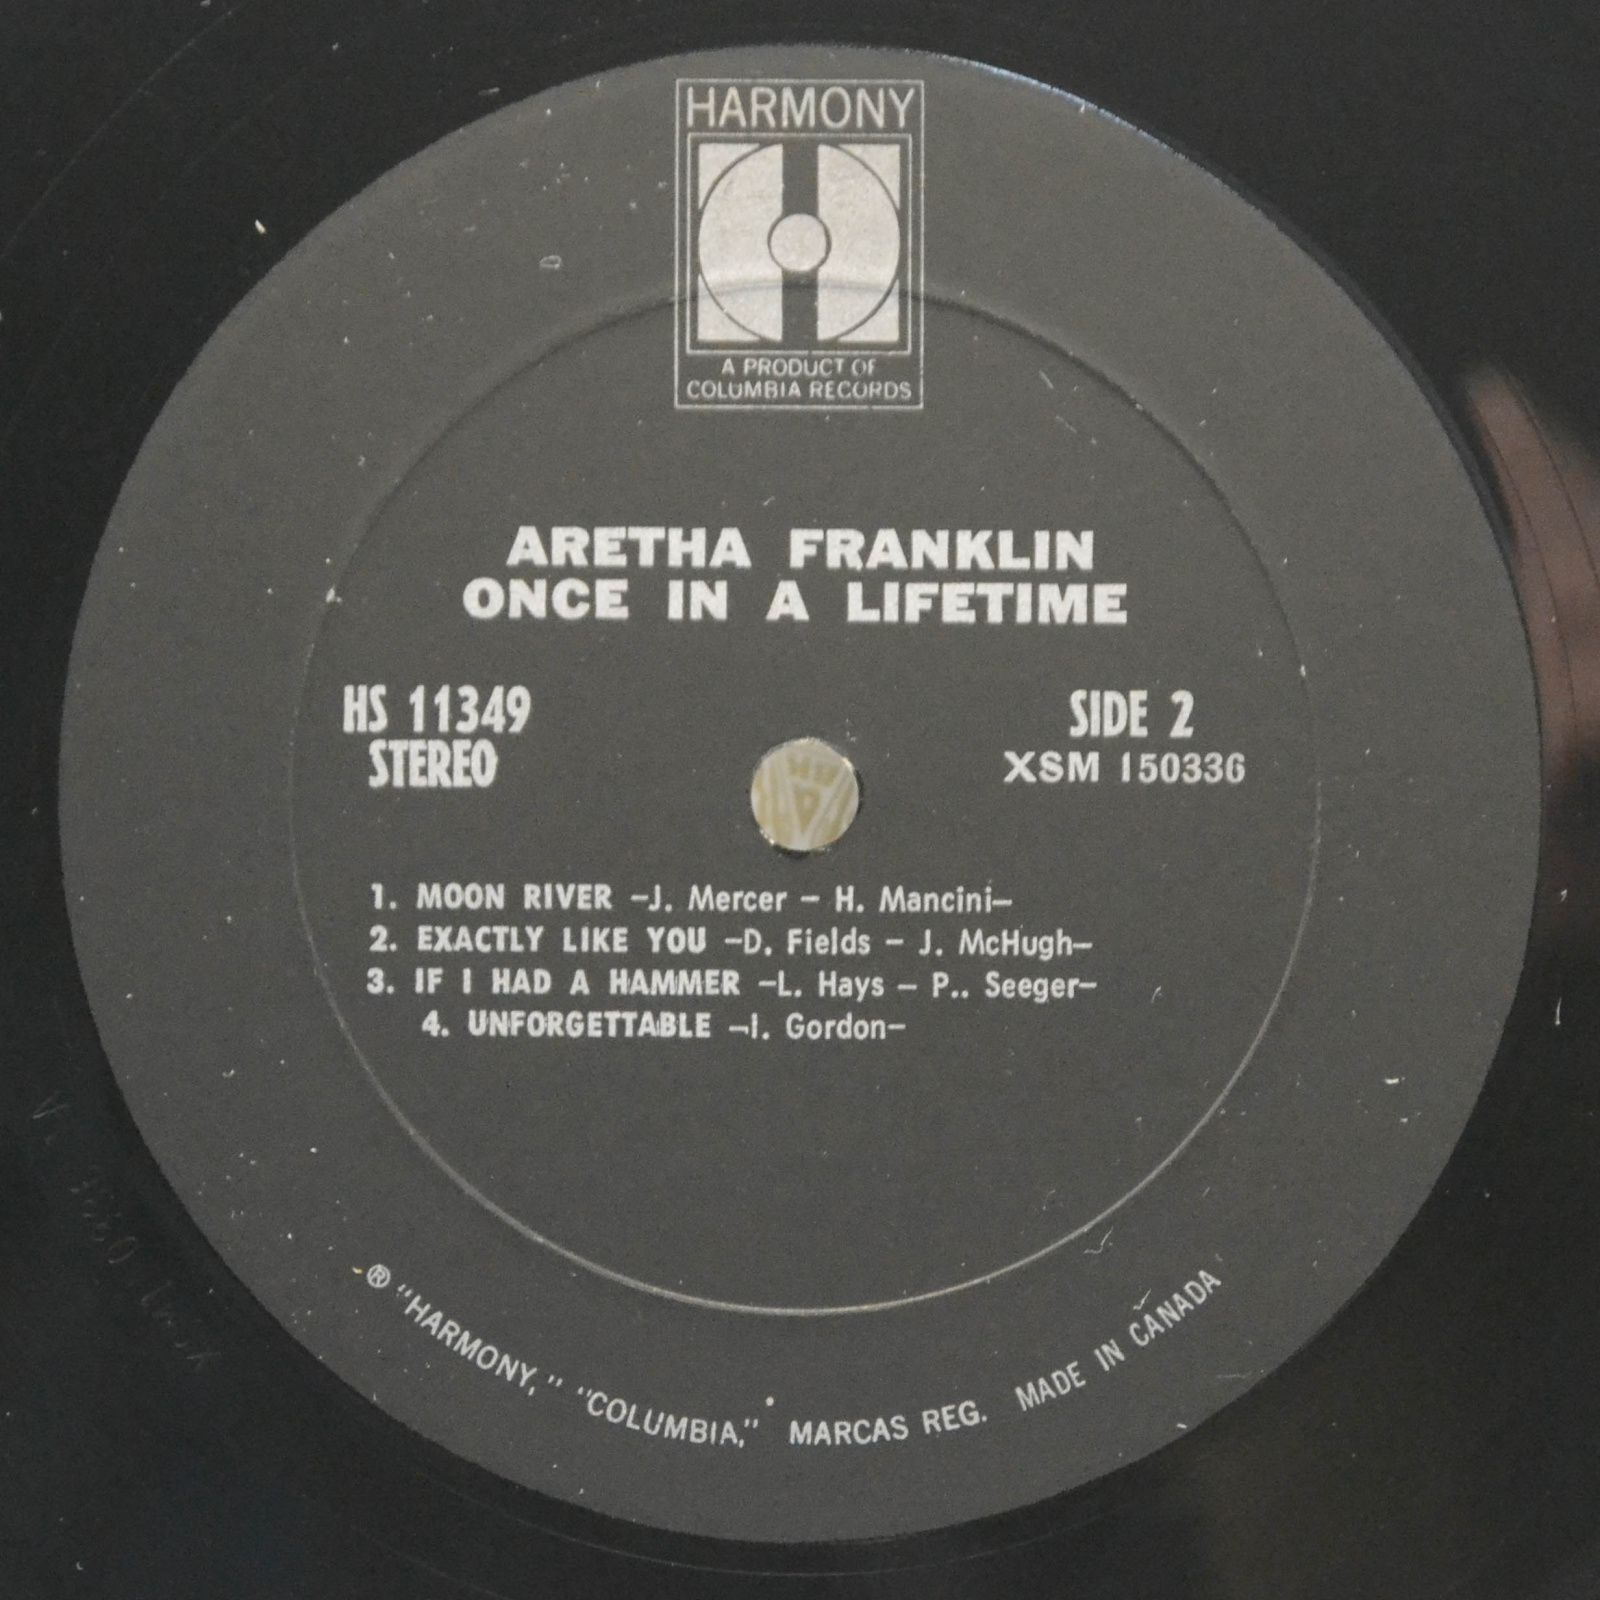 Aretha Franklin — Once In A Lifetime, 1969